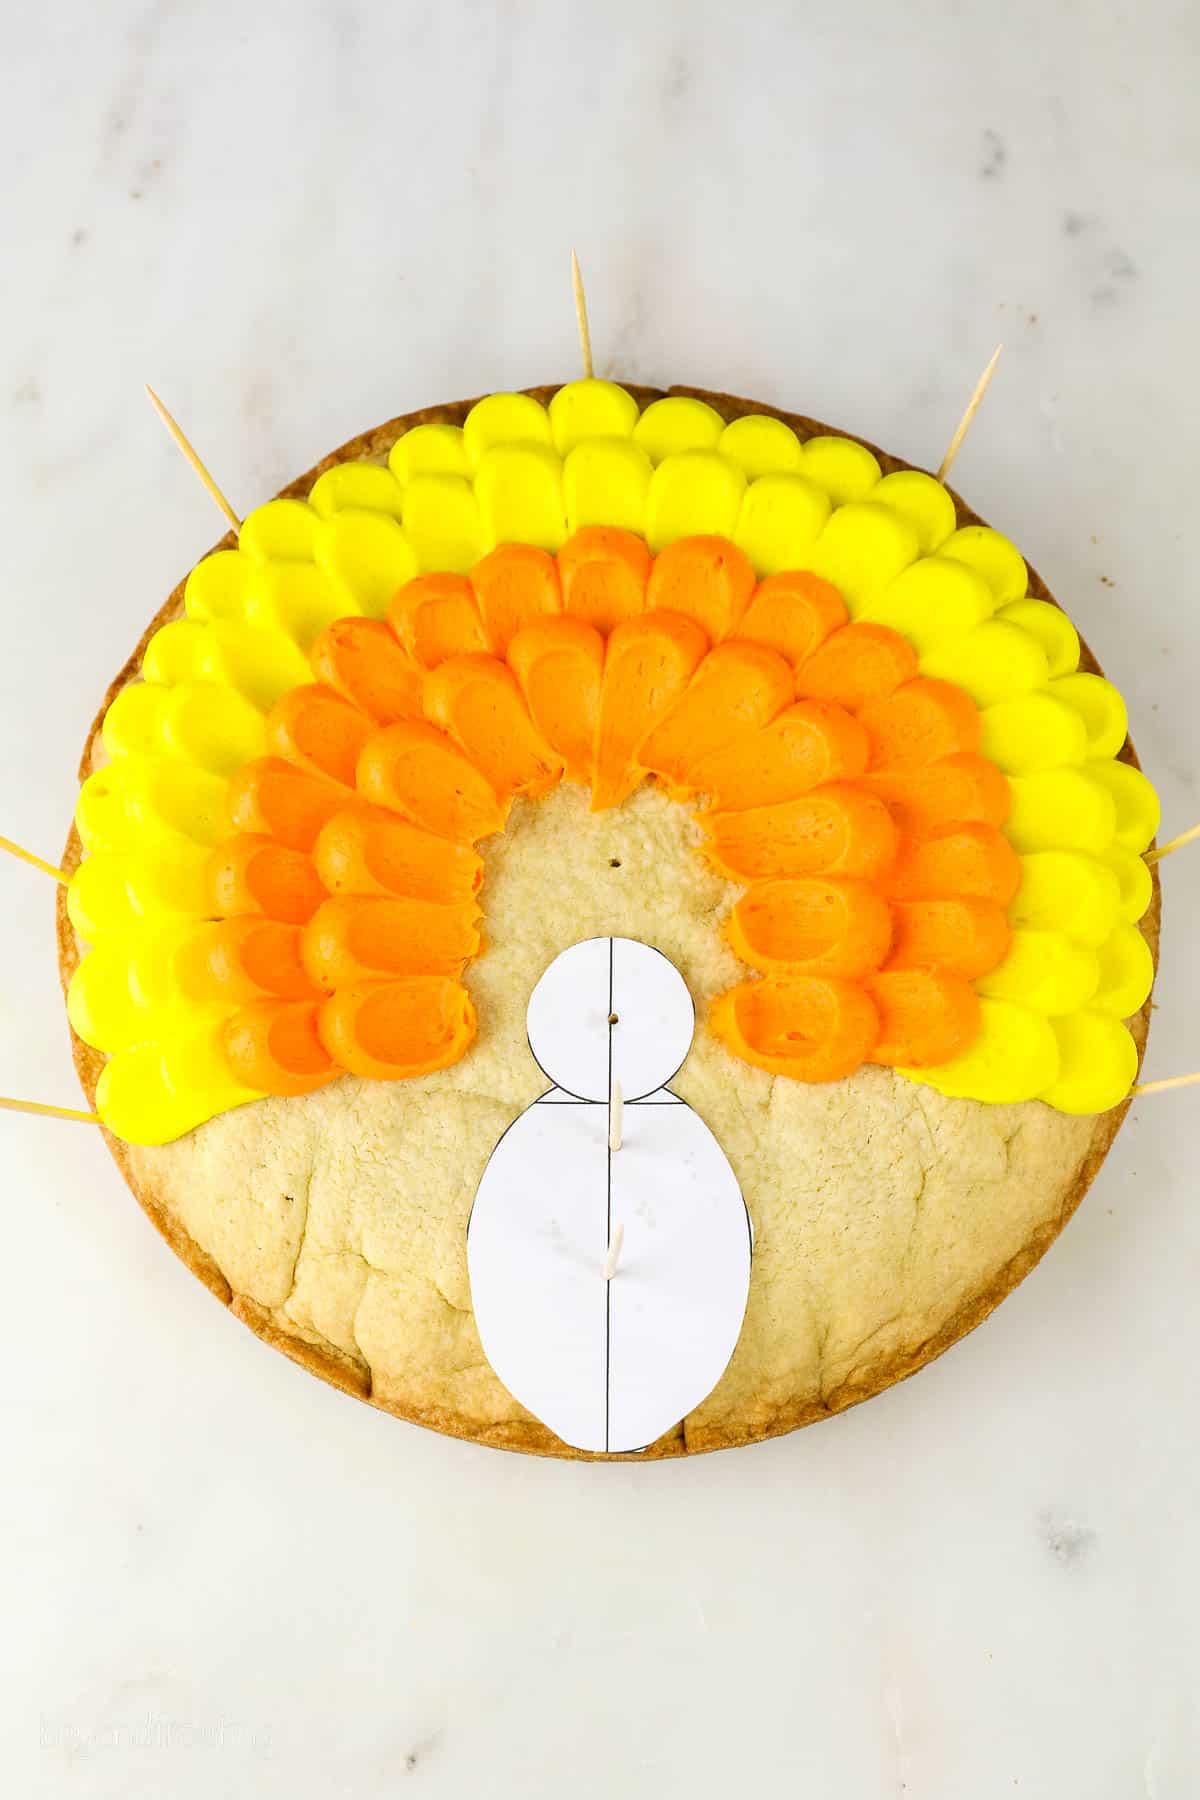 process photo of piped orange and yellow buttercream on a round cookie